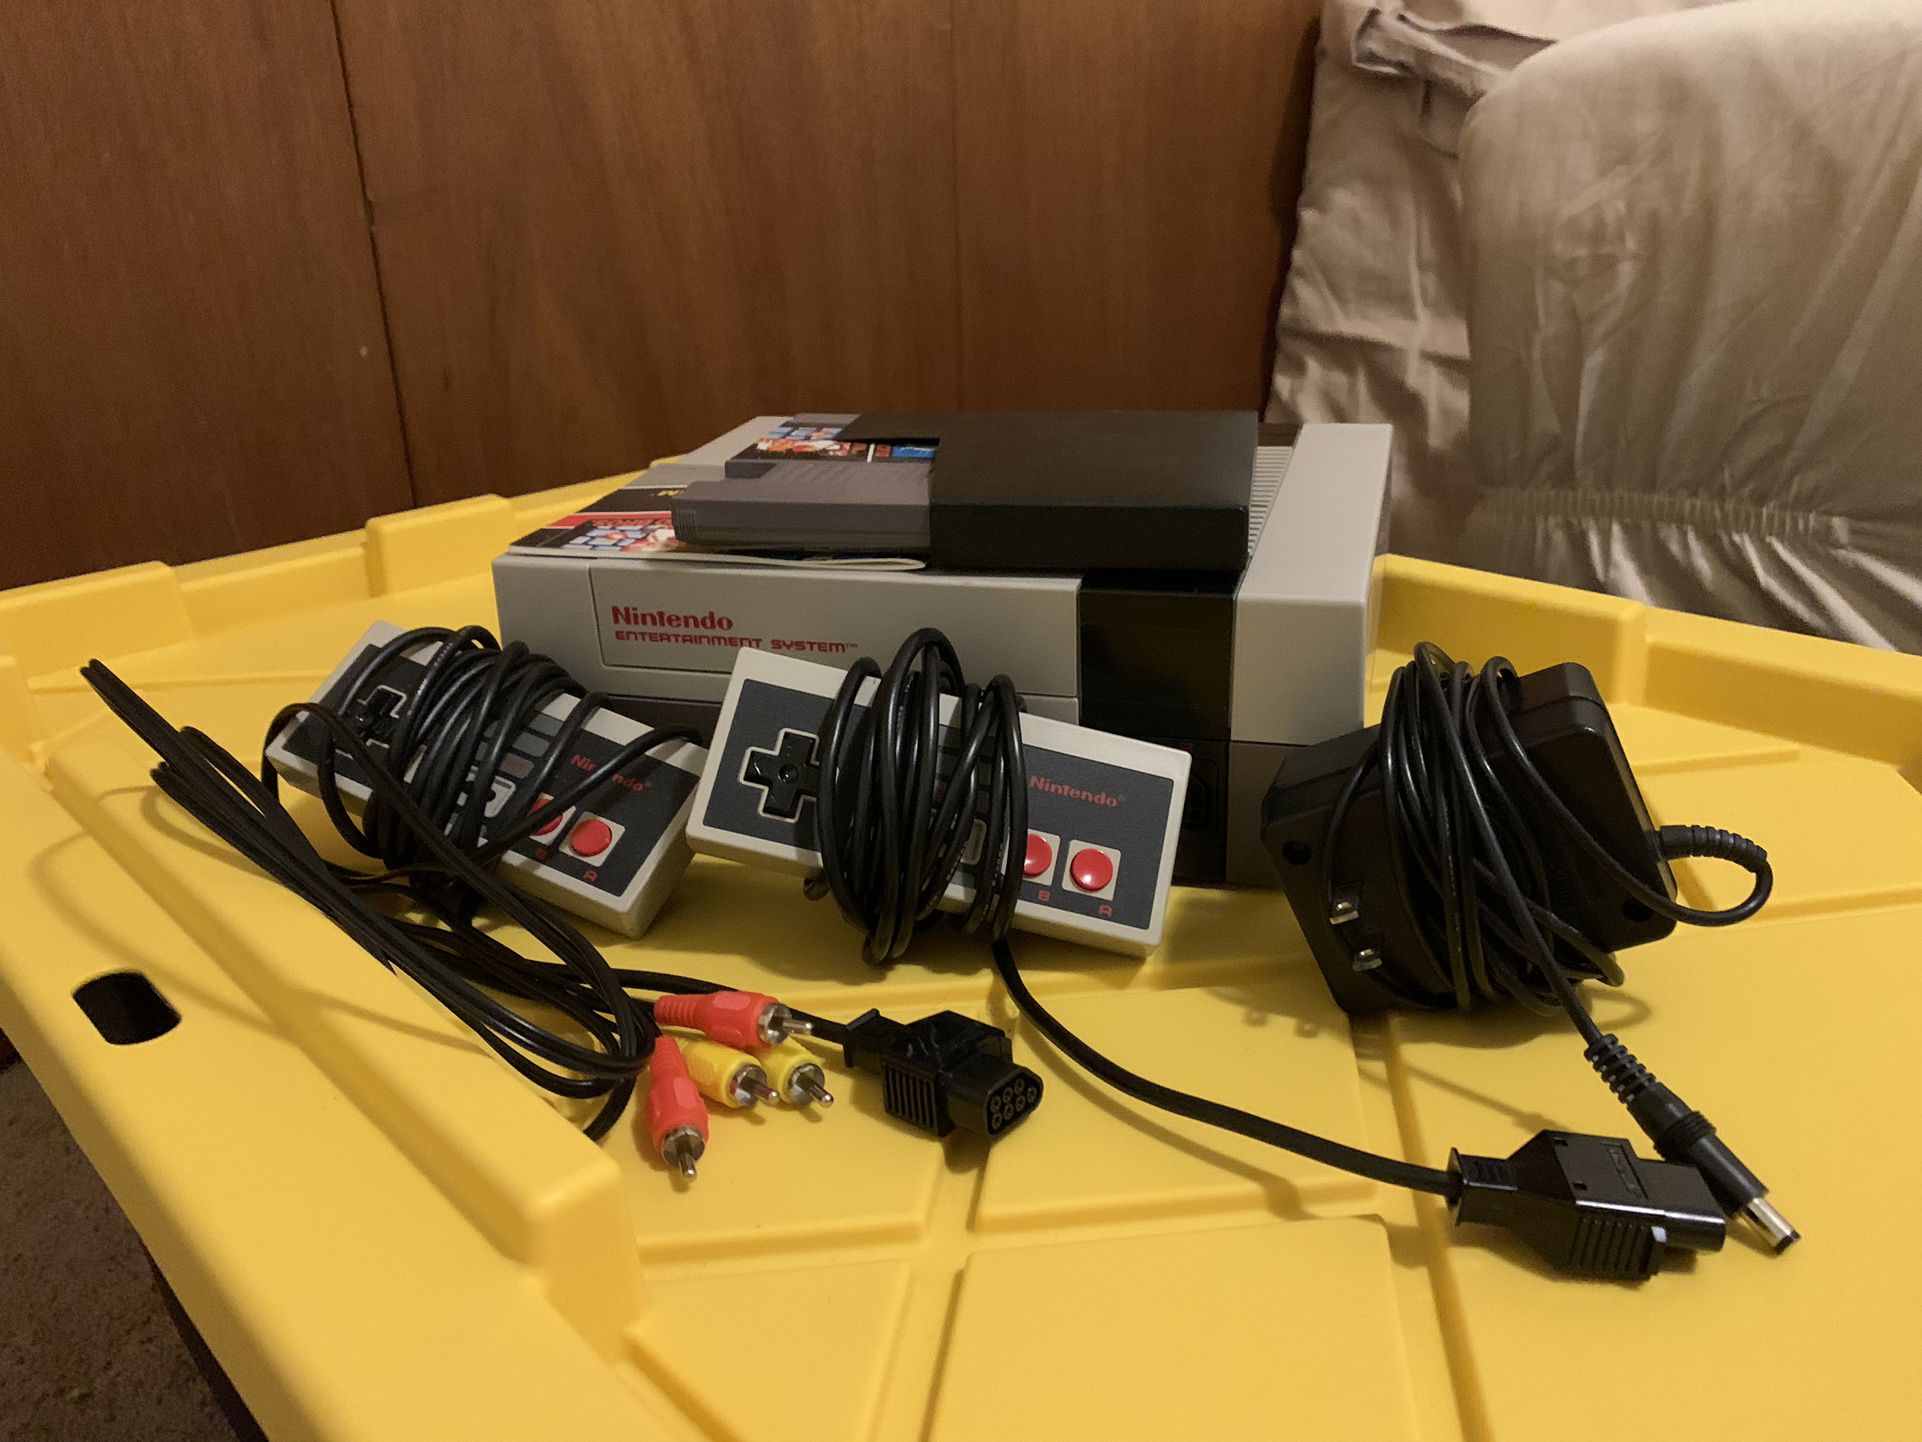 Fully Working Original N.E.S. (Nintendo Entertainment System) With 2 Controllers, A 2 in 1 Game, and all Required Cords.